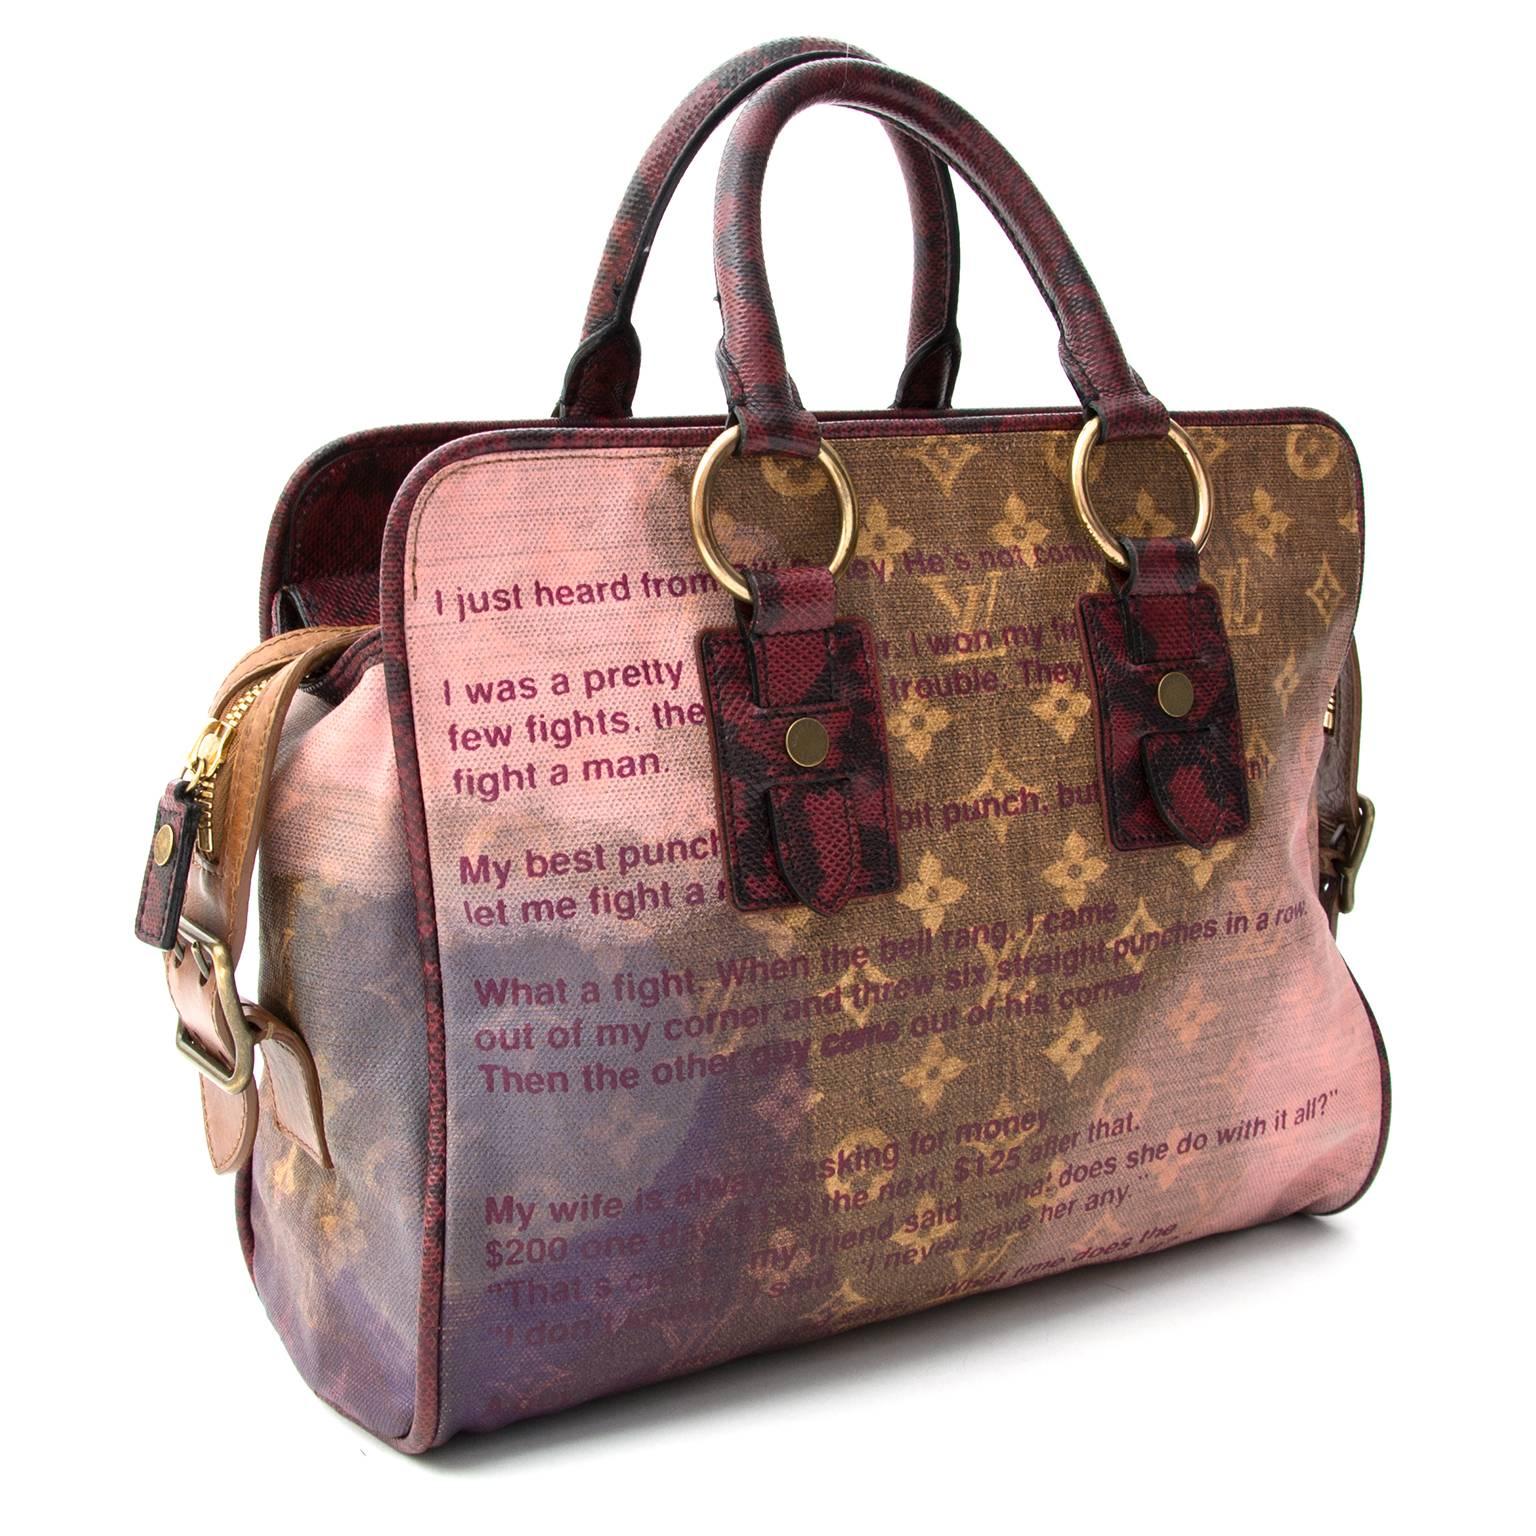 Limited edition printed Jokes bag in pink and brown printed canvas. 
Finished with snakeprinted details on the closure and handles. 
This rare piece features golden hardware and zipper closure. 
Suede interior with two extra pockets.
